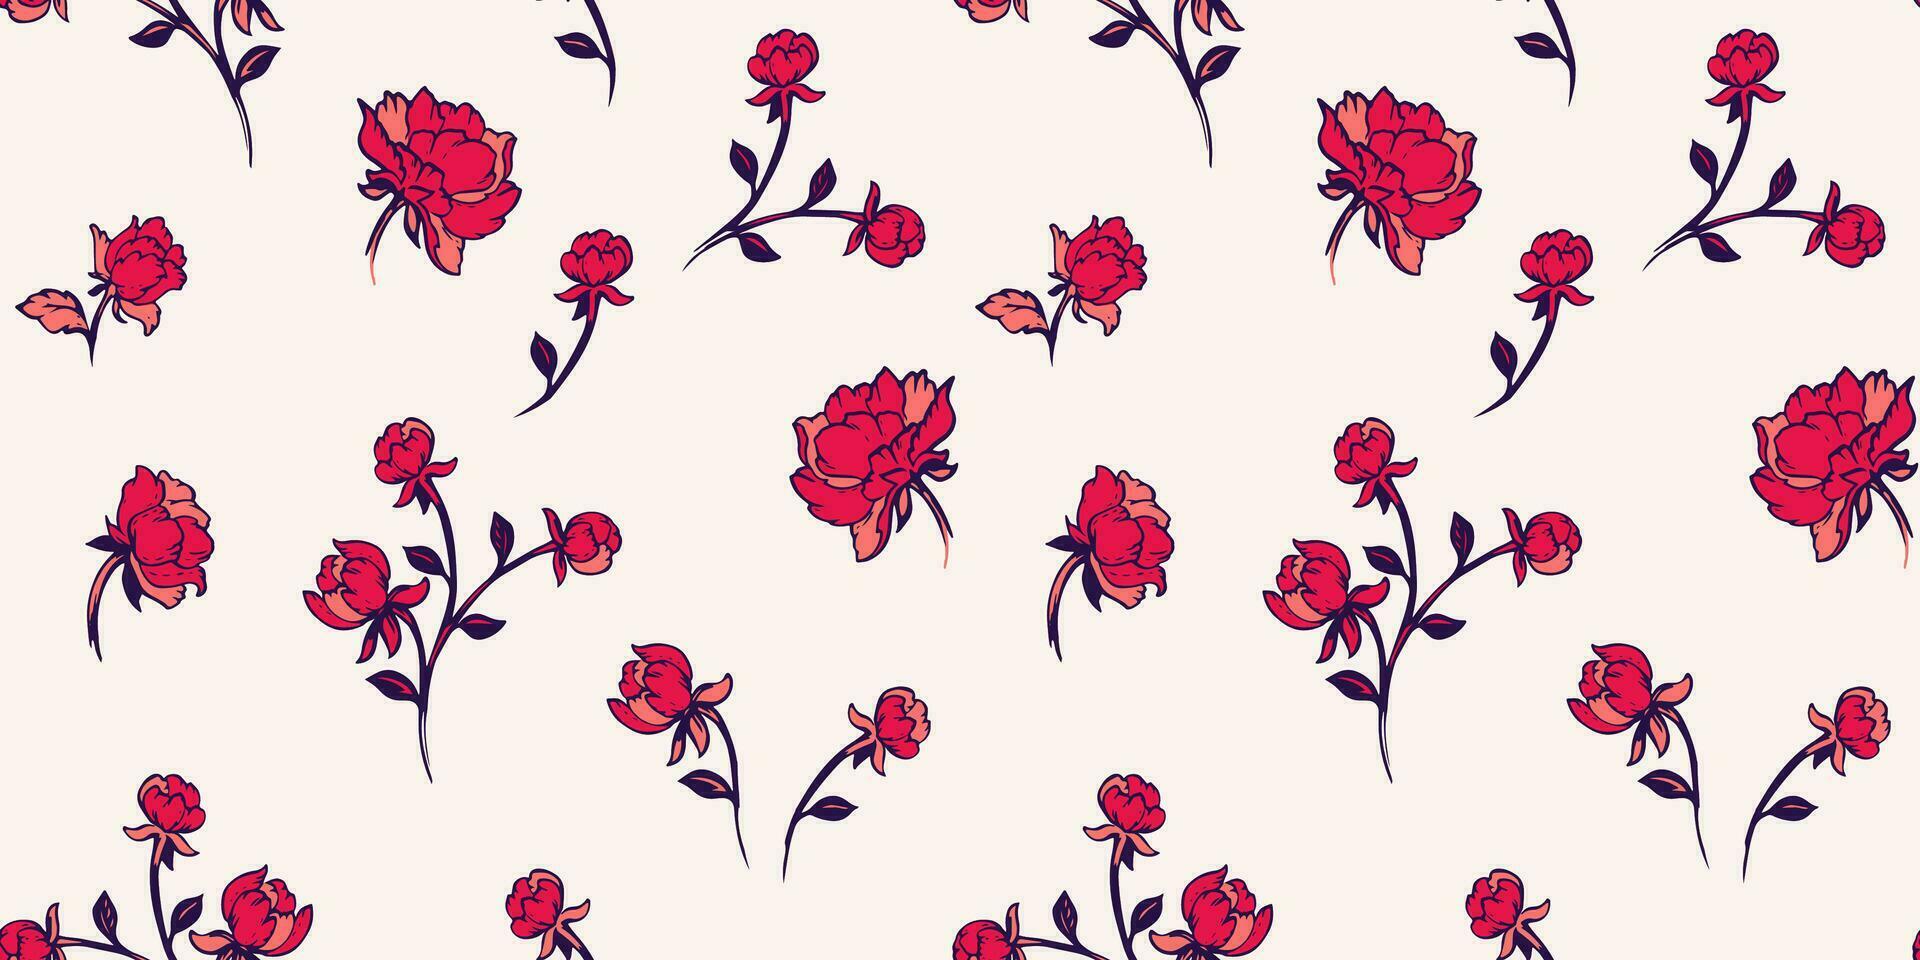 Seamless  colorful stylized  flowers rosebuds, roses pattern on a white back. Vector hand drawn abstract, ditsy floral. Template for design, textile, fashion, print, fabric, interior decor, wallpaper